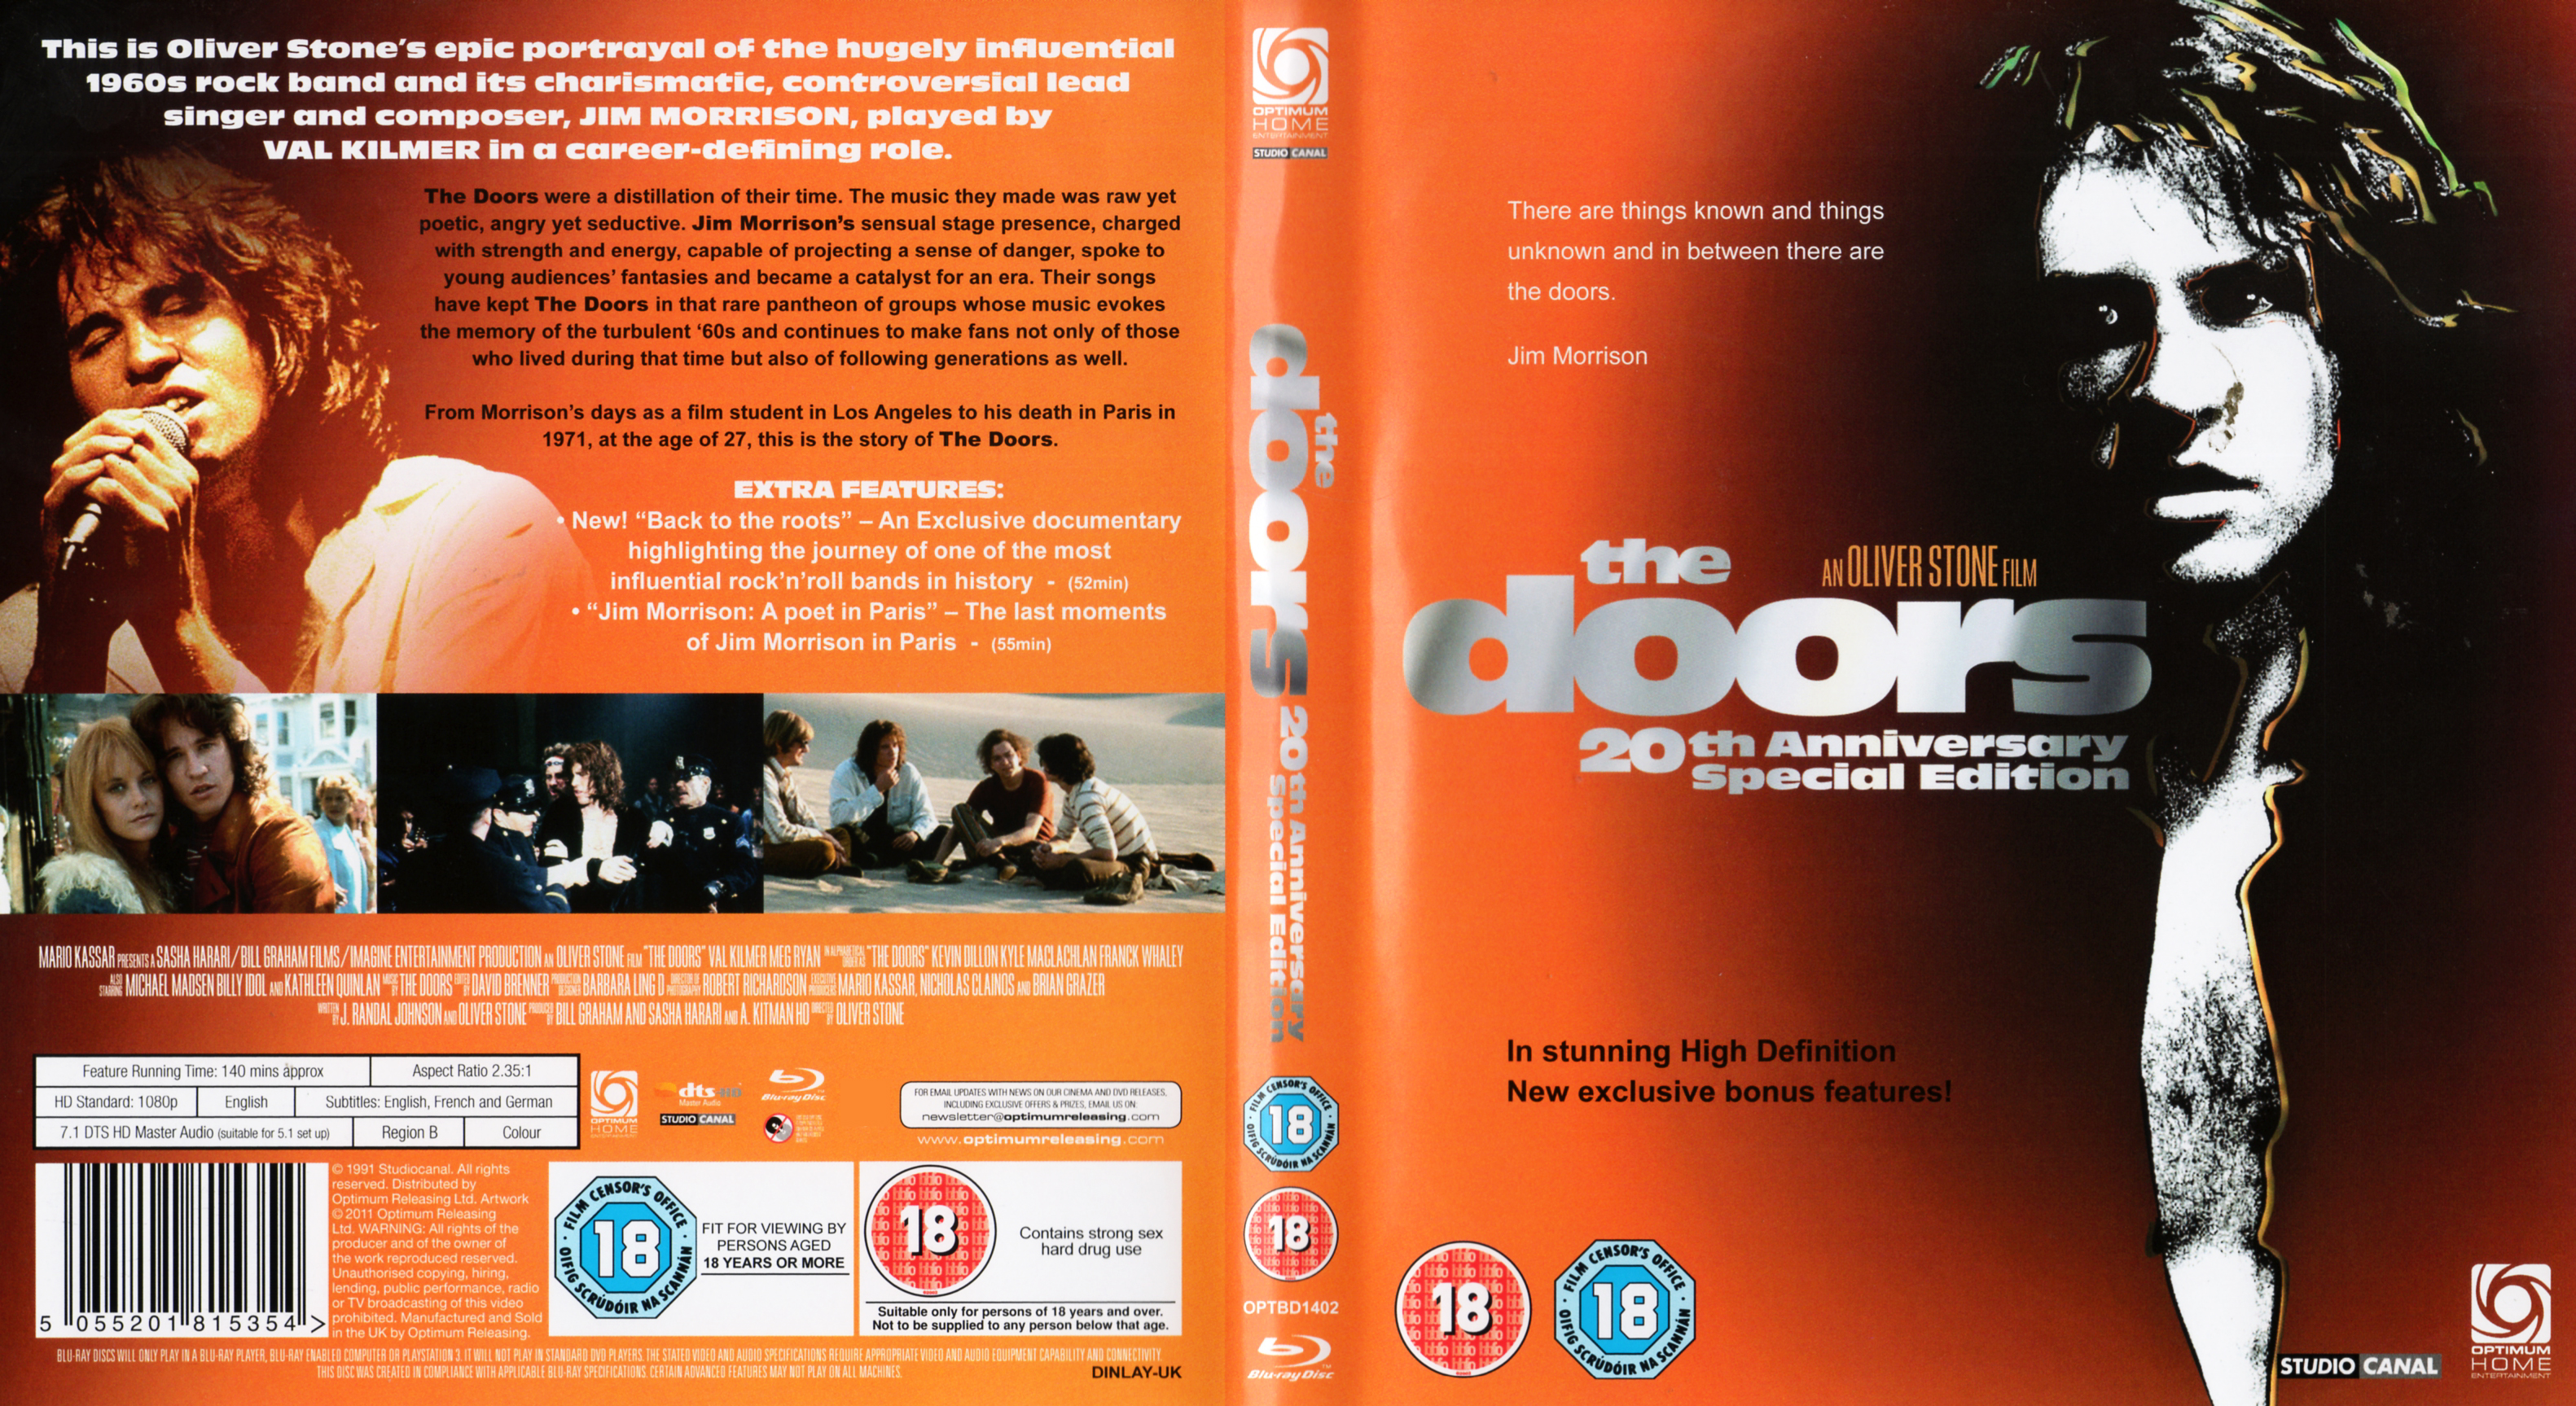 The Doors Blu-ray: Special Edition